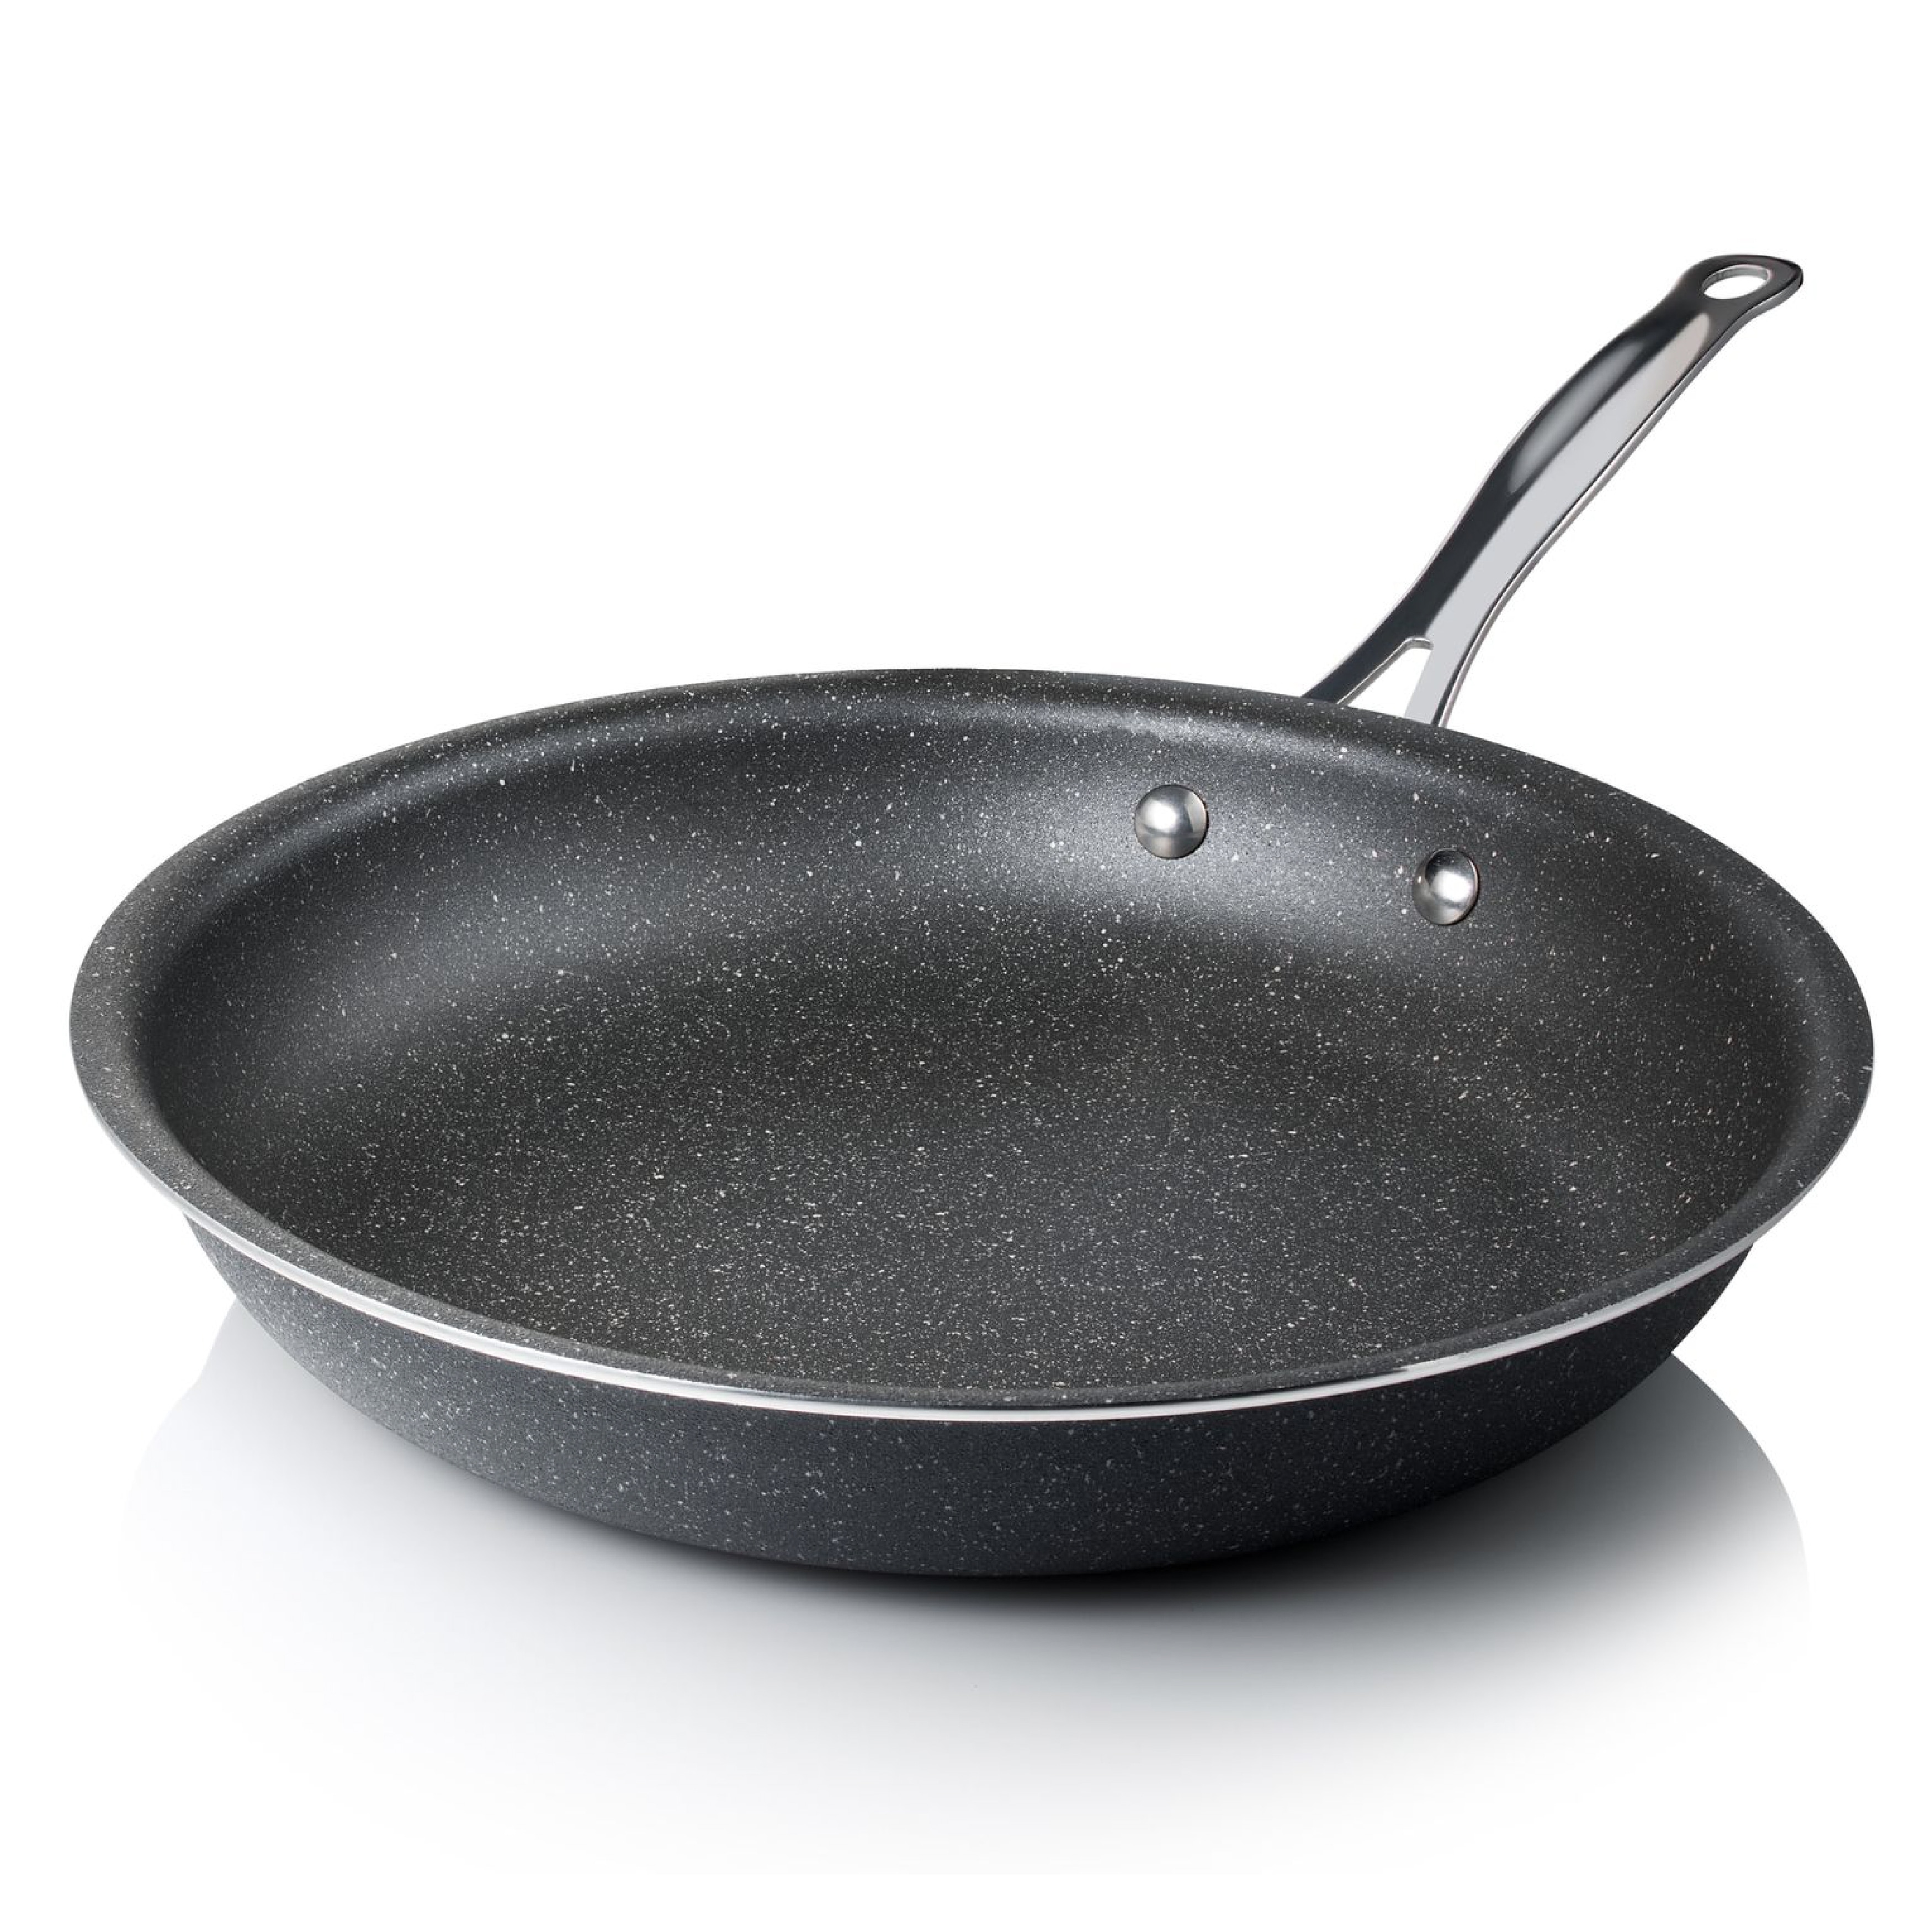 Granite Stone 14 Nonstick Frying Pan with Ultra Durable Mineral and Diamond Triple Coated Surface, Family Sized Open Skillet with Stainless Steel Stay